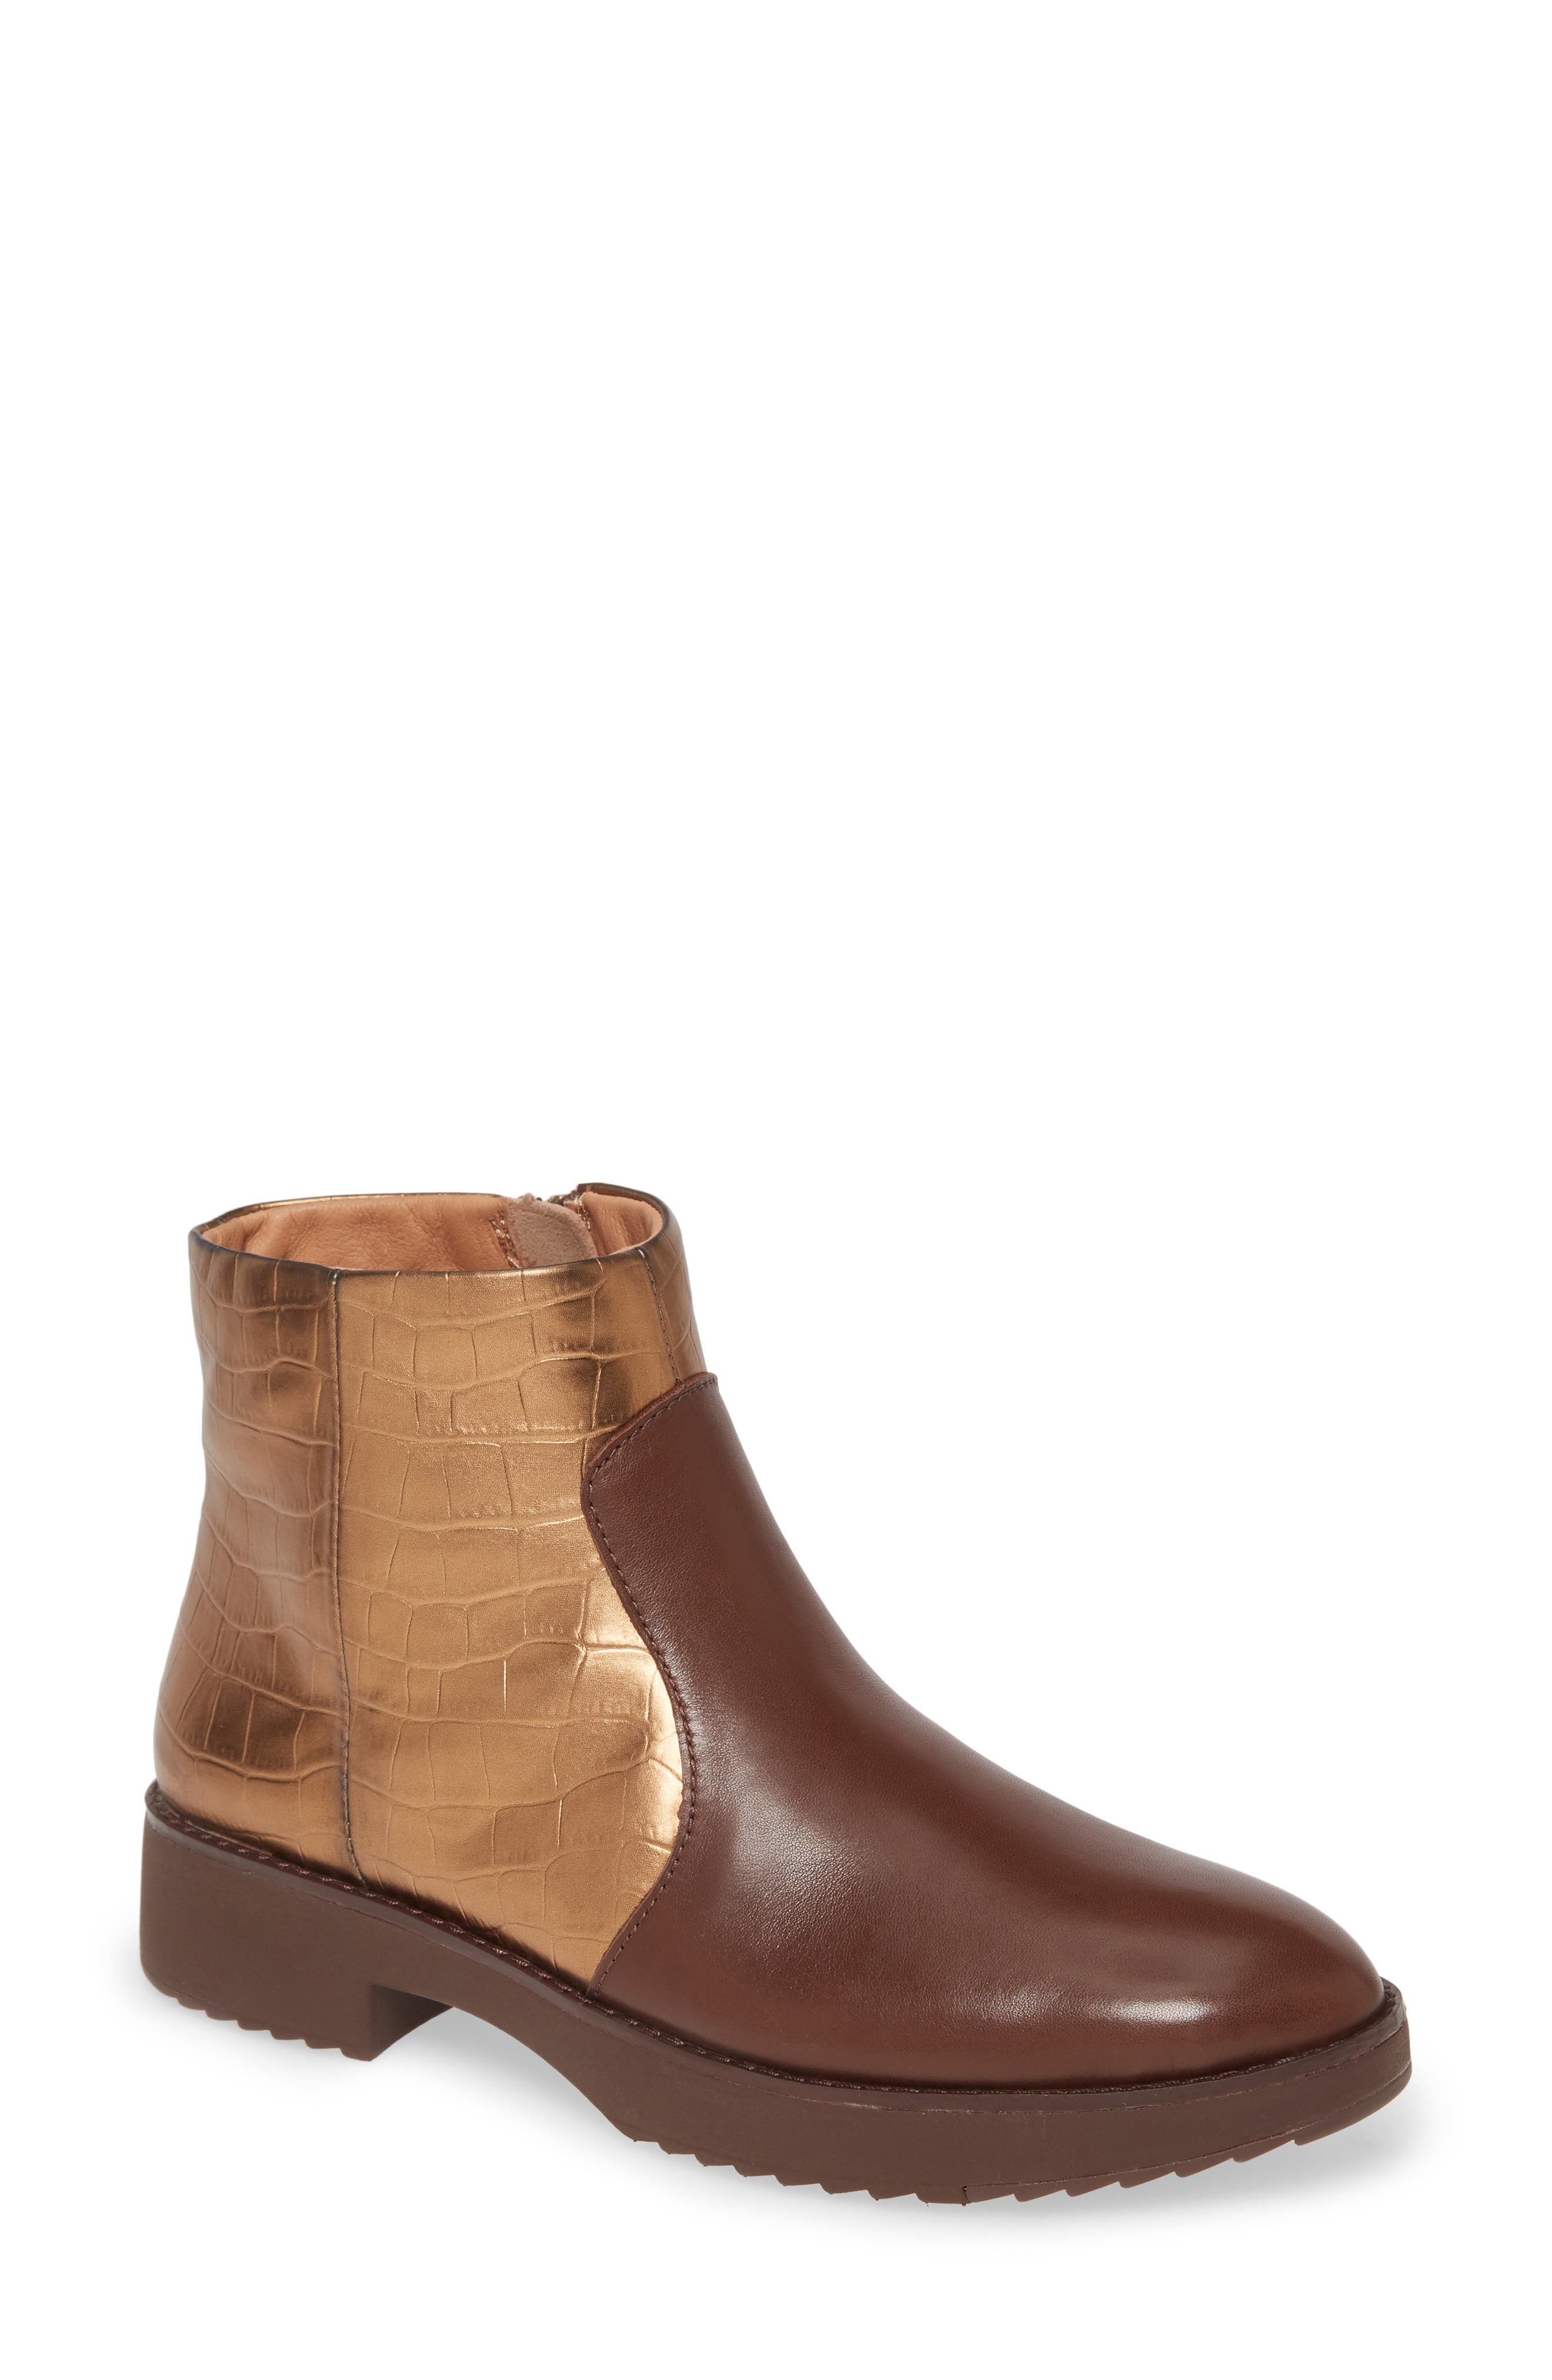 Fitflop Mara Ankle Boot In Chocolate Brown Mix Leather